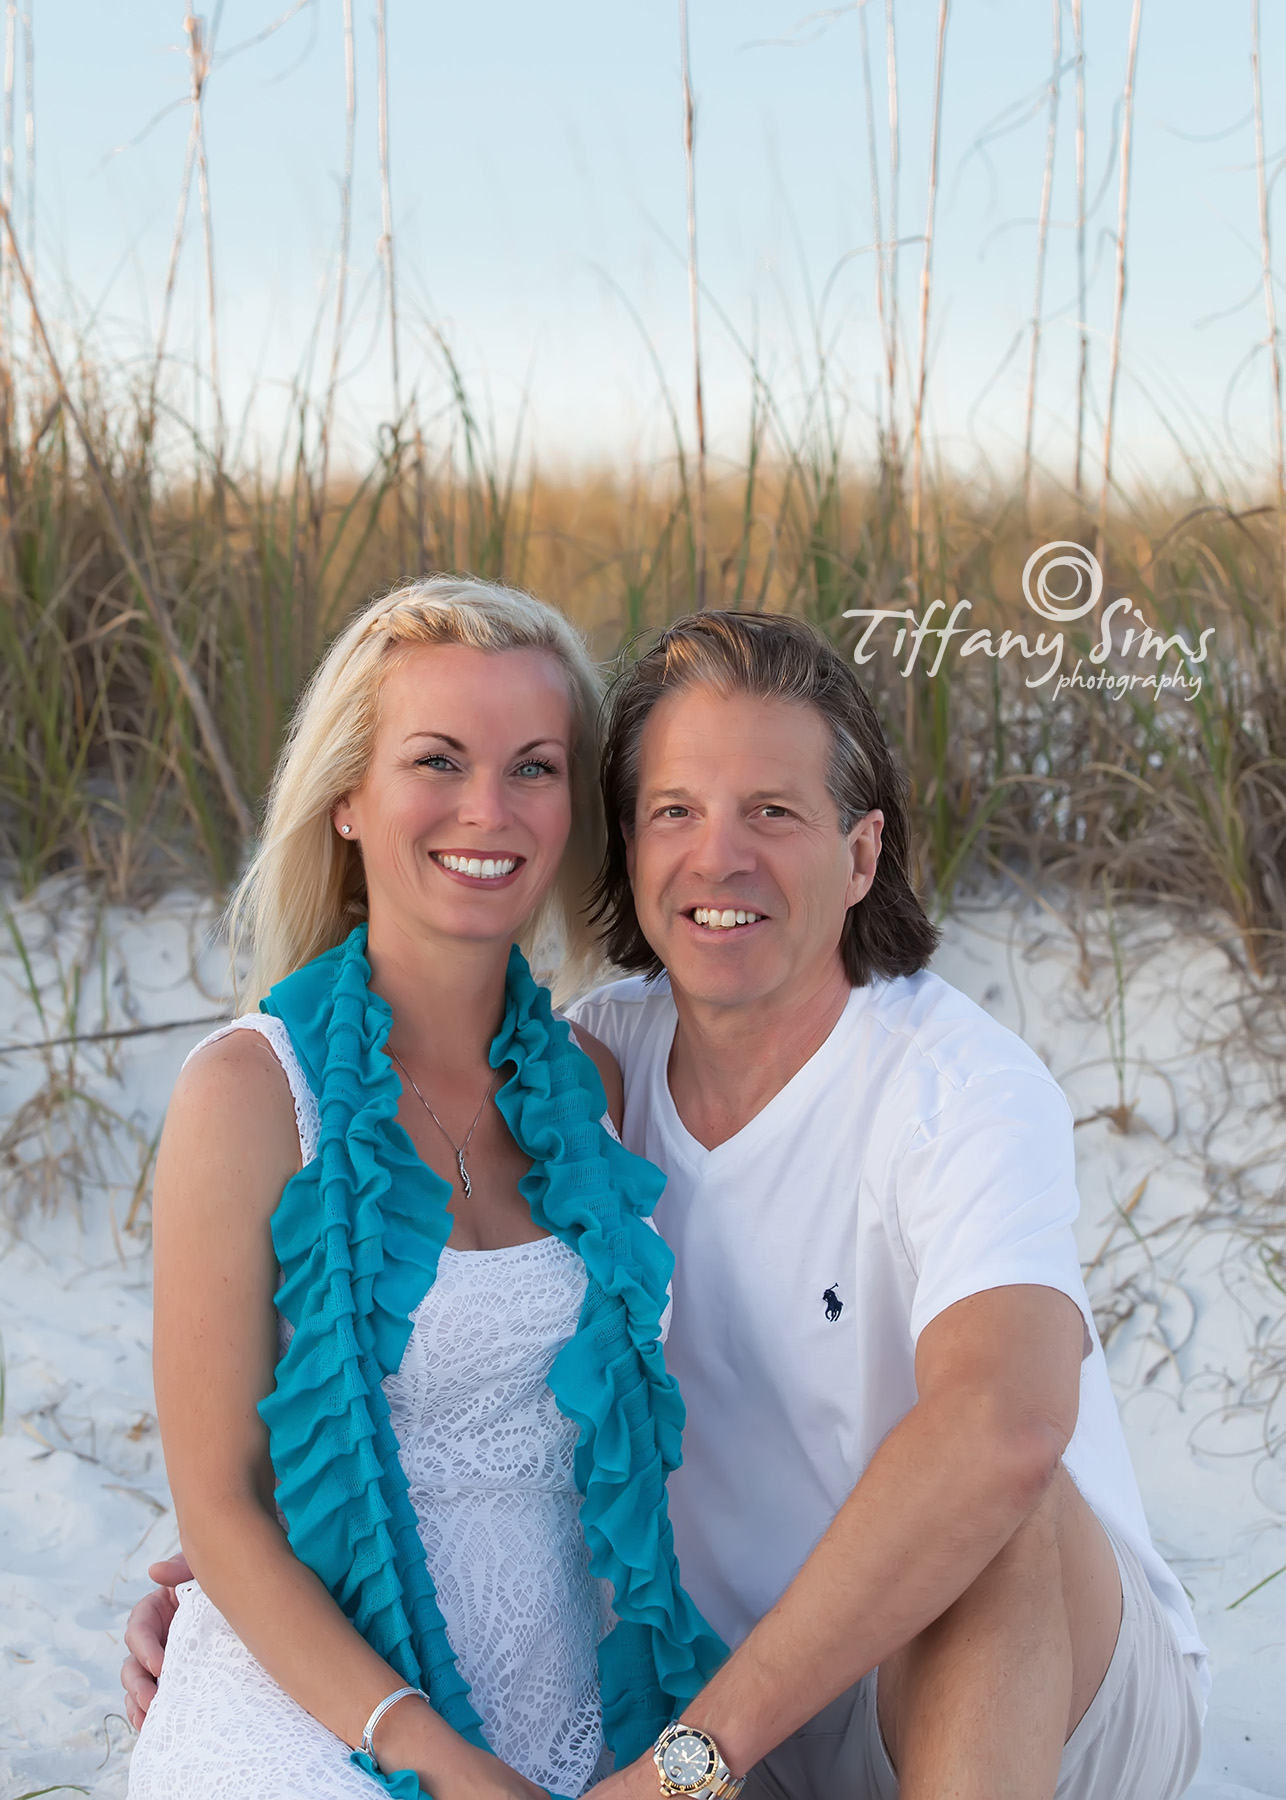 Destin Photography by Tiffany Sims Photography #destin #destinphotography #destinbeachphotography #30aphotography #30abeachphotography #destinphotographer #30aphotographer #fortwaltonbeachphotography #okaloosaislandphotography | Fort Walton Beach Photography by Tiffany Sims Photography - #destinphotography #destinbeachphotographer #destinphotographers